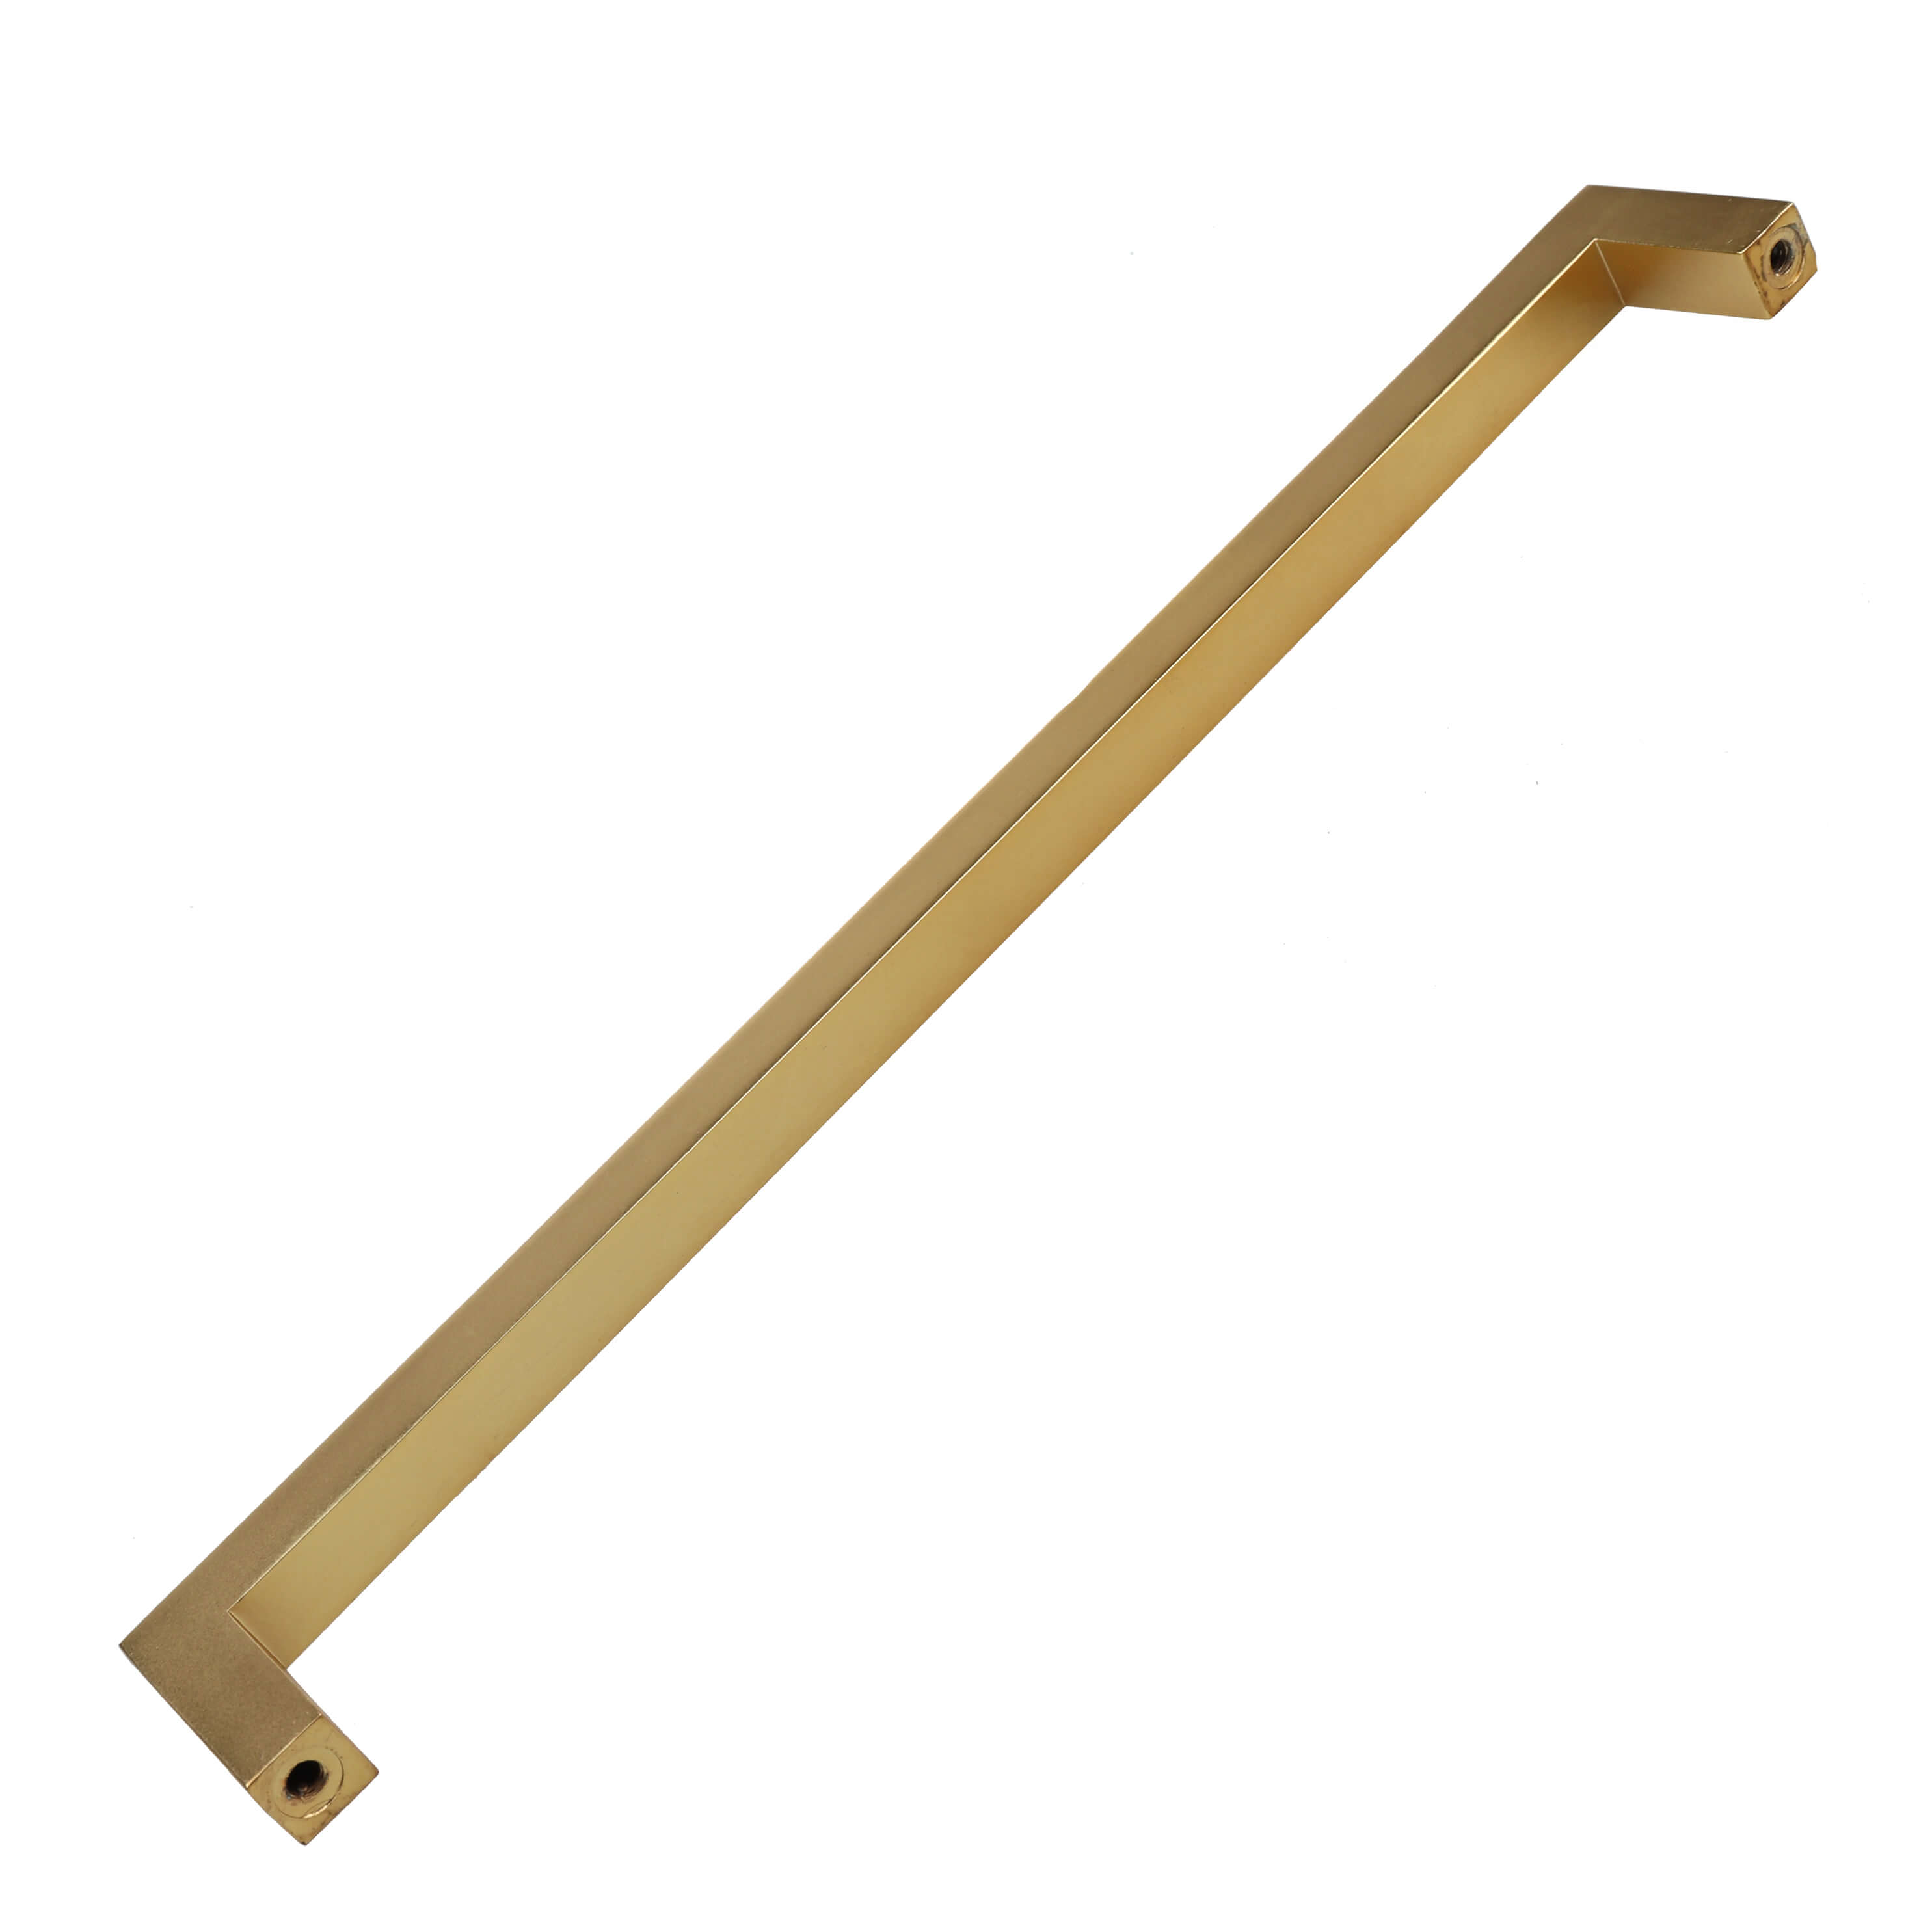 GlideRite 8-3/4 in. Center Solid Square Bar Cabinet Pulls, Brass Gold, Pack of 5 - image 3 of 3